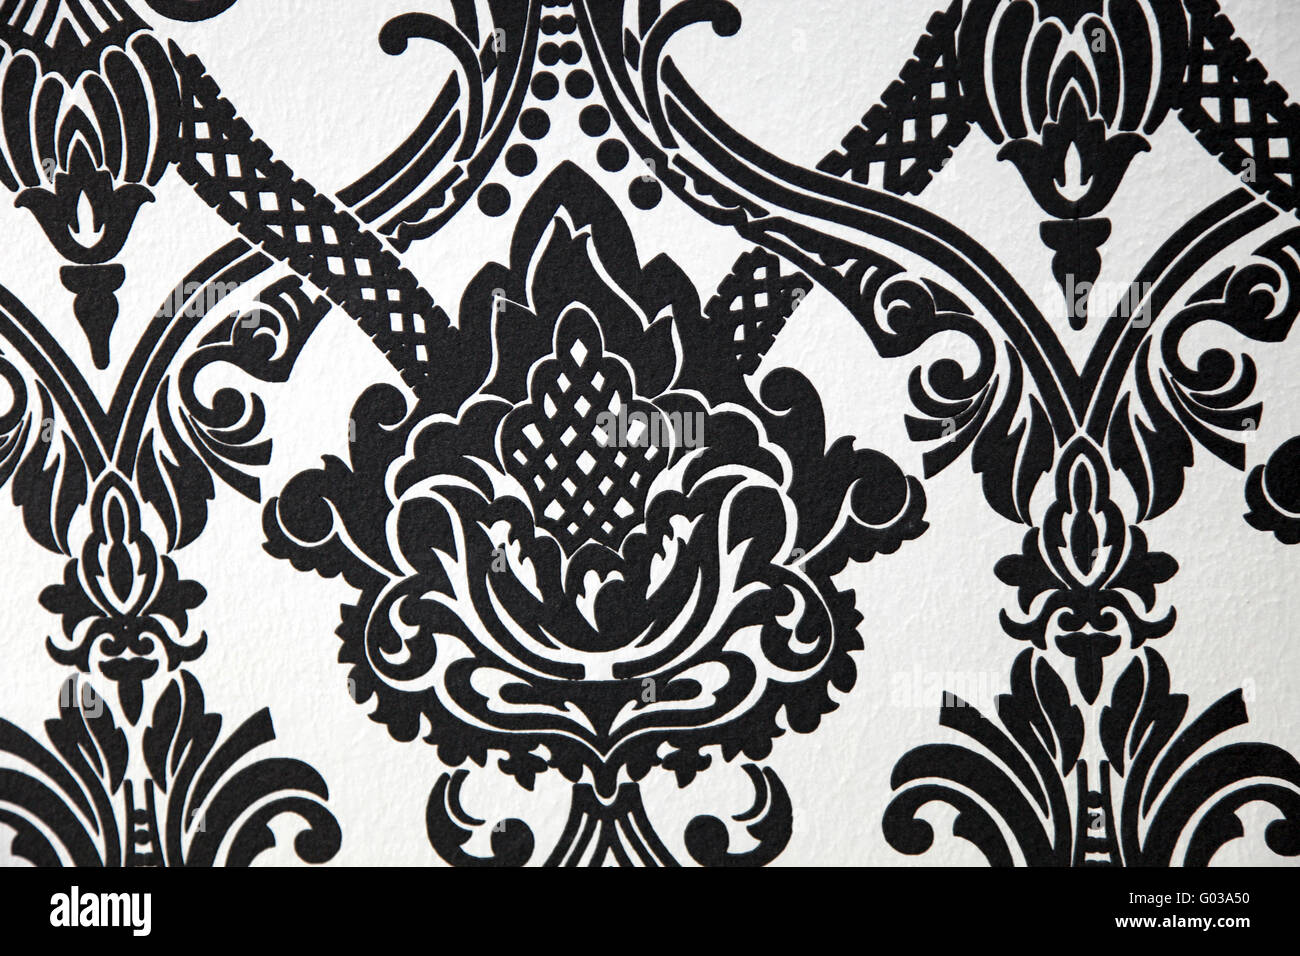 wallpaper or fabric design in black and white Stock Photo